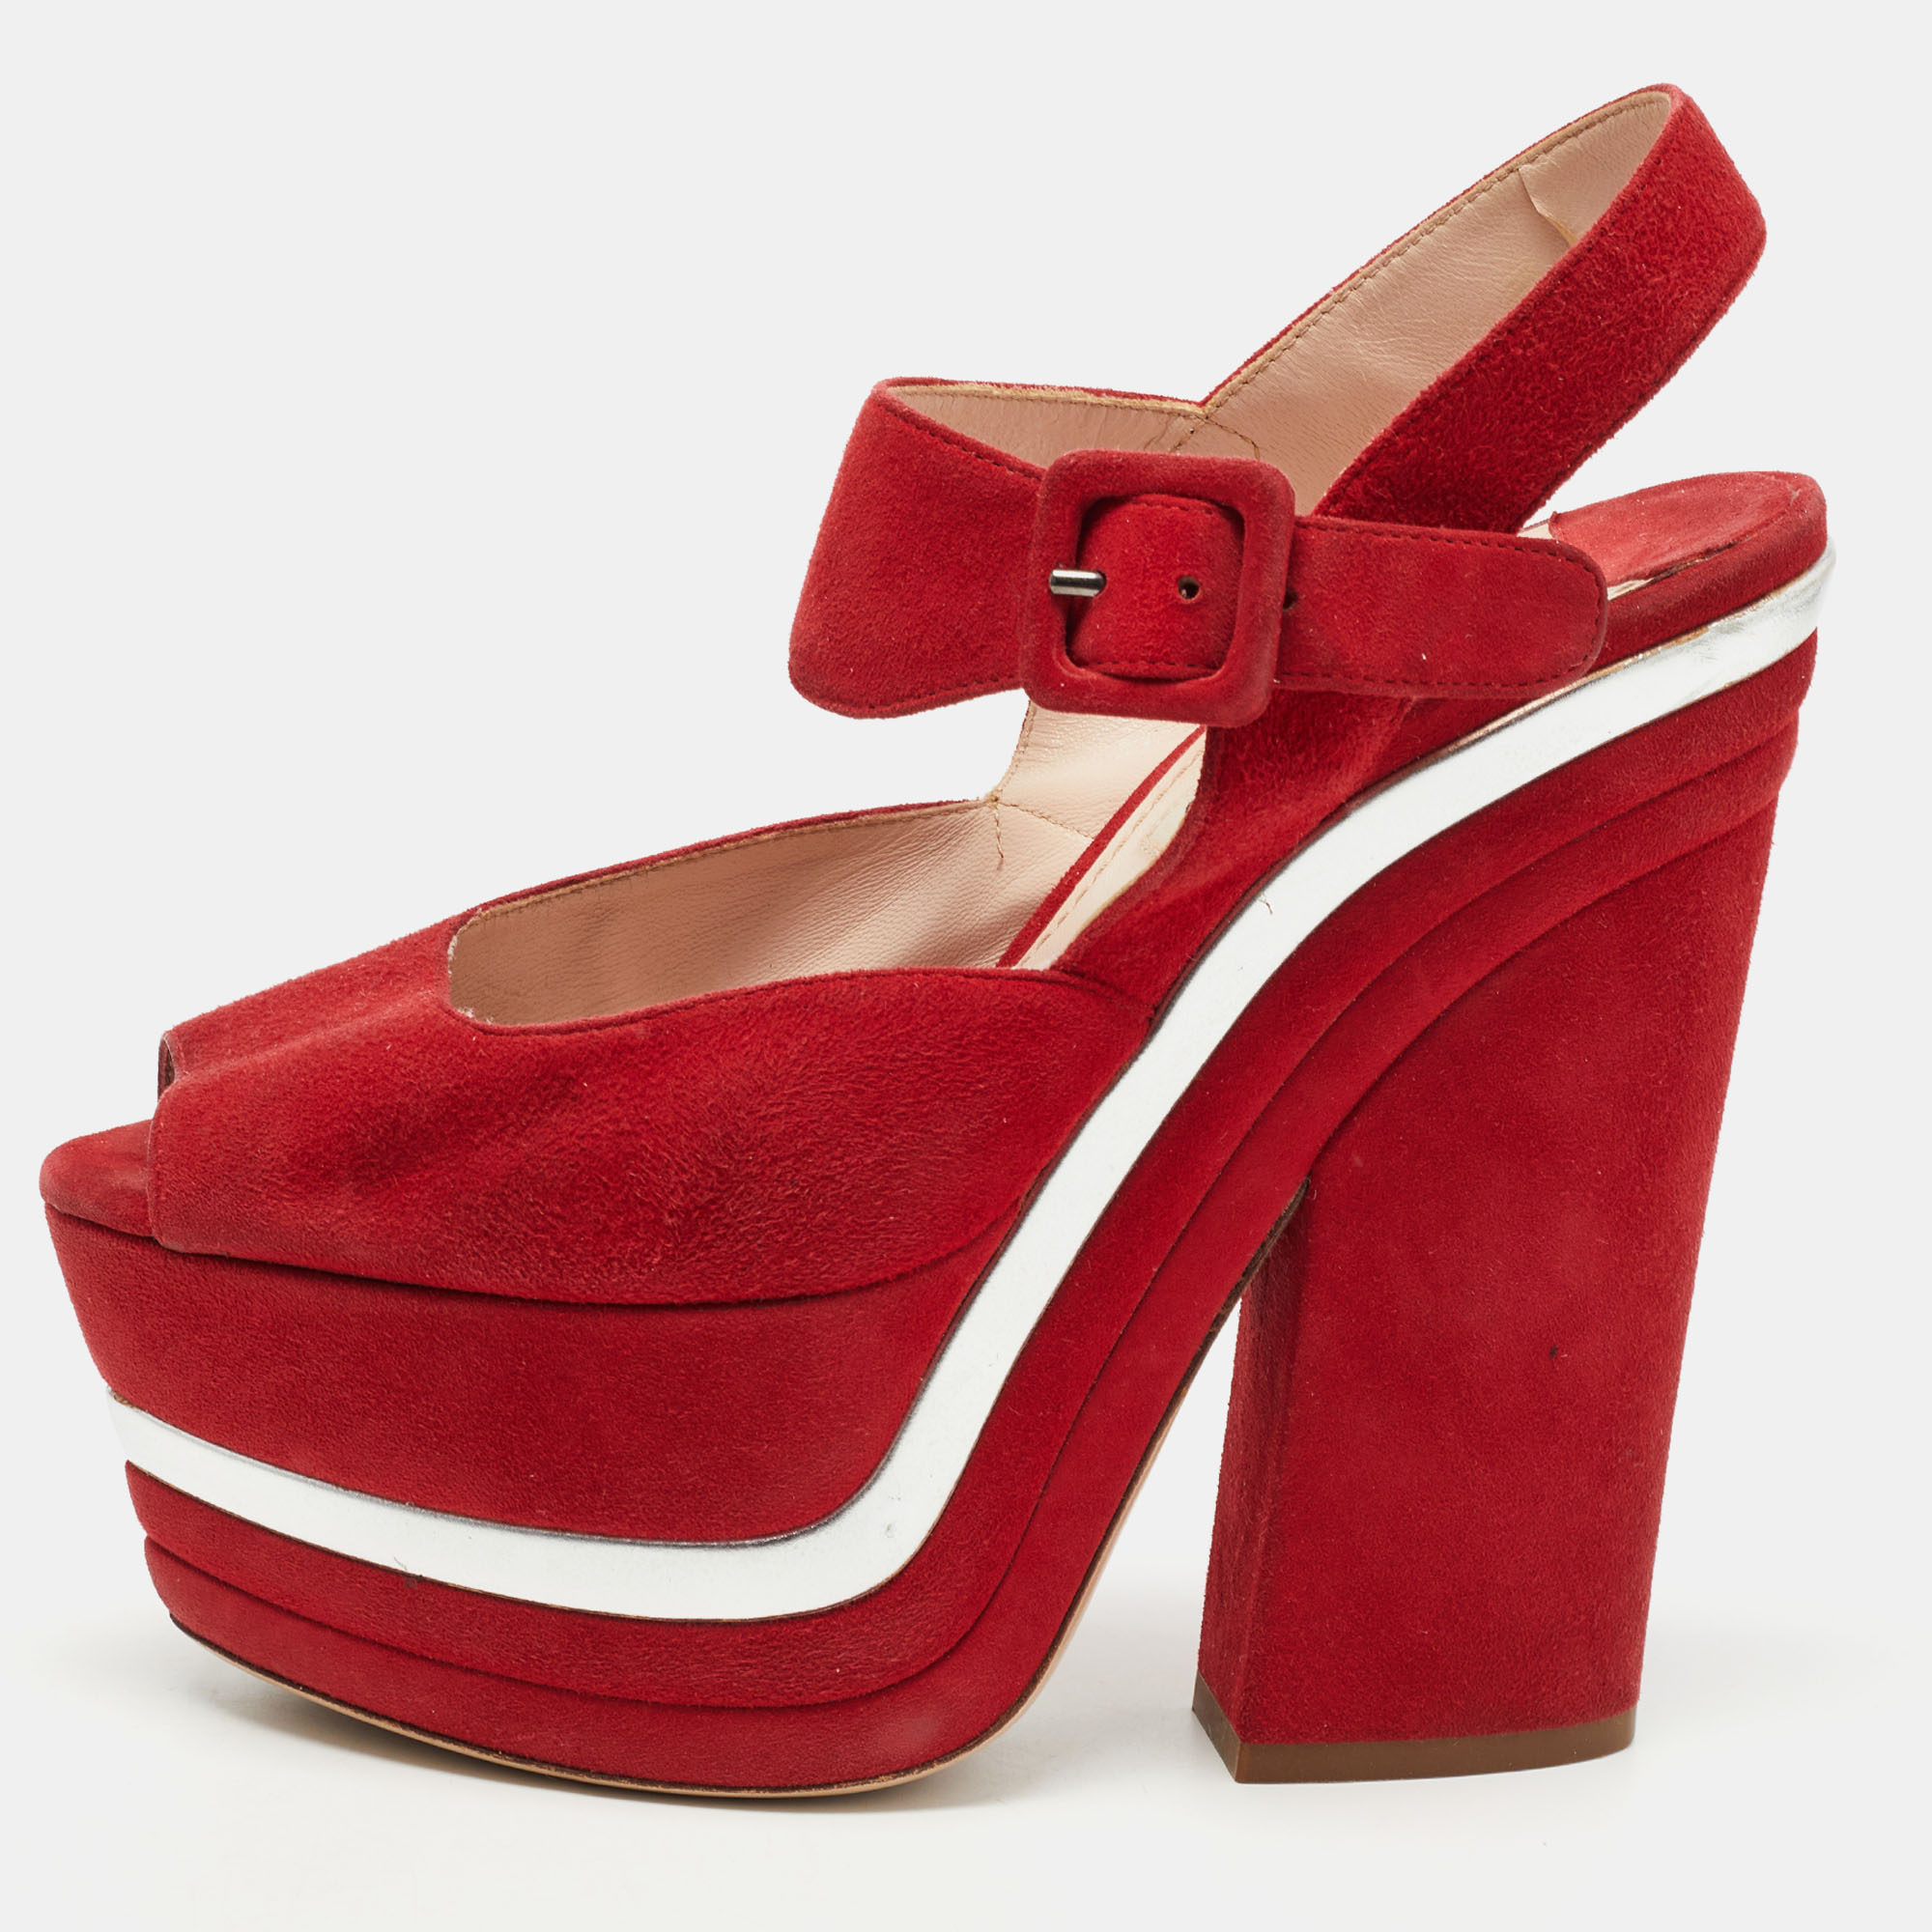 Pre-owned Miu Miu Red Suede Platform Ankle Strap Sandals Size 36